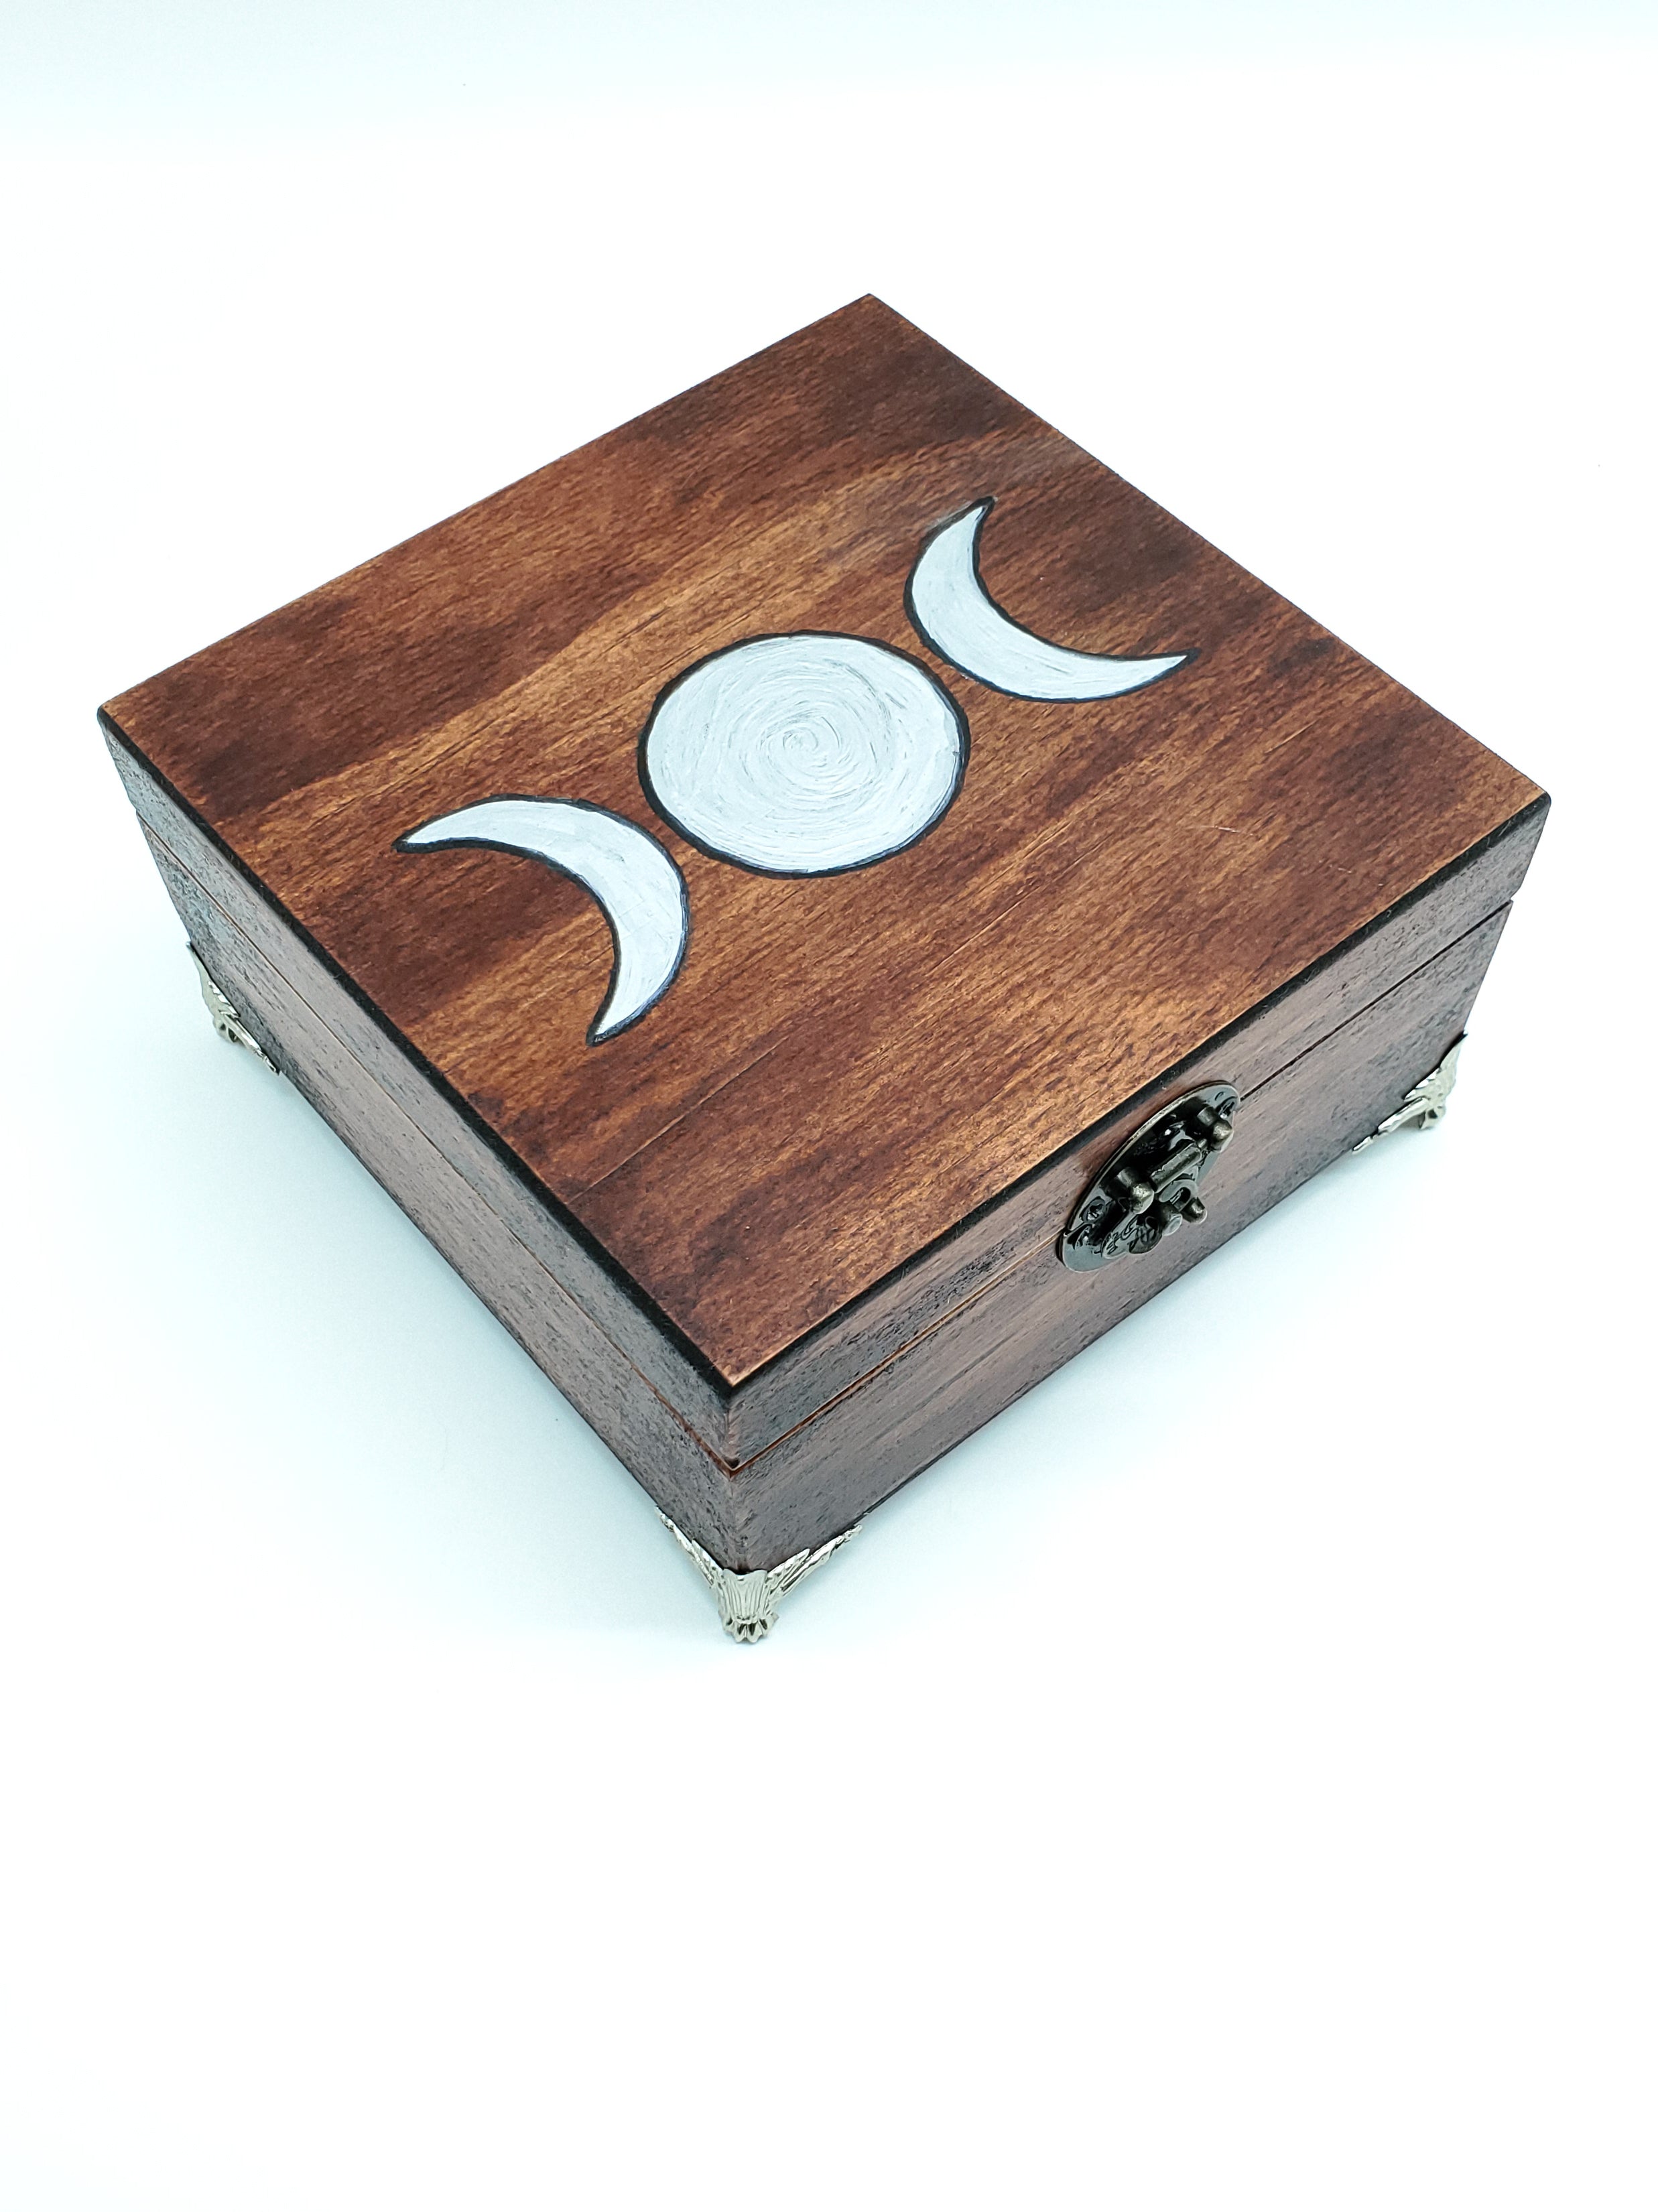 Moon Phase Divided Oils/Jewelry Box - The Caffeinated Raven